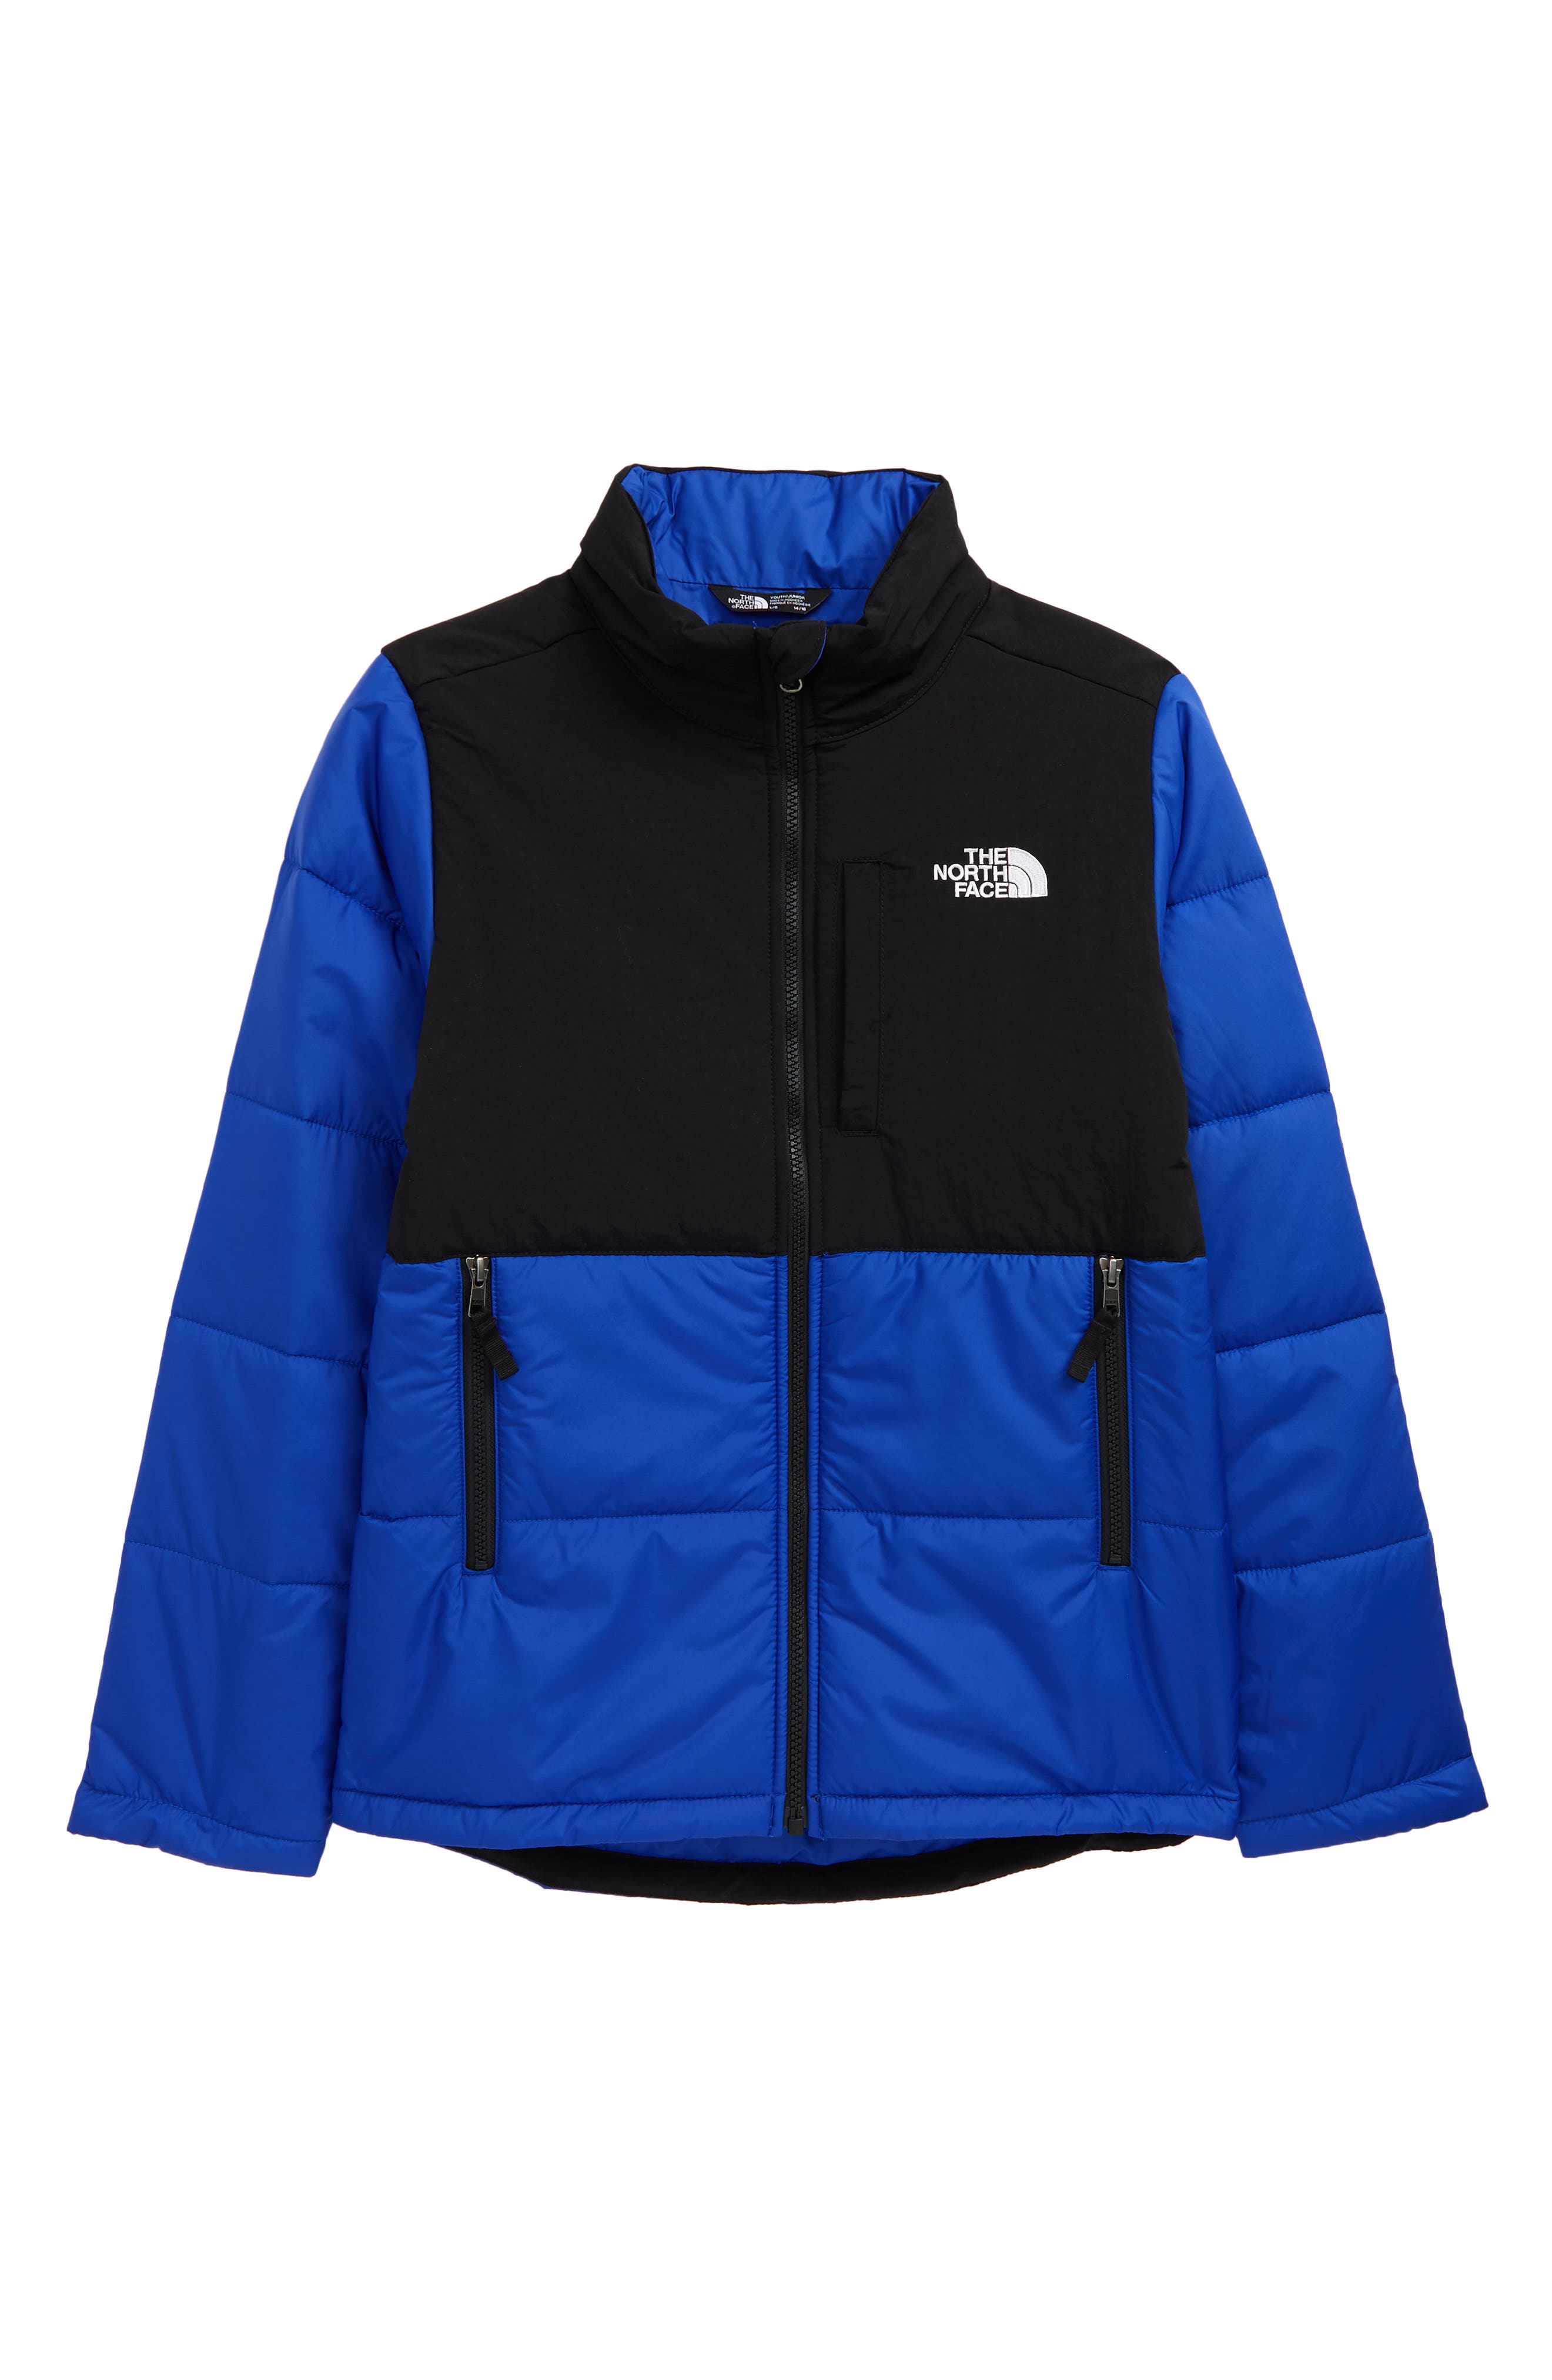 All Boys' The North Face Sale | Nordstrom